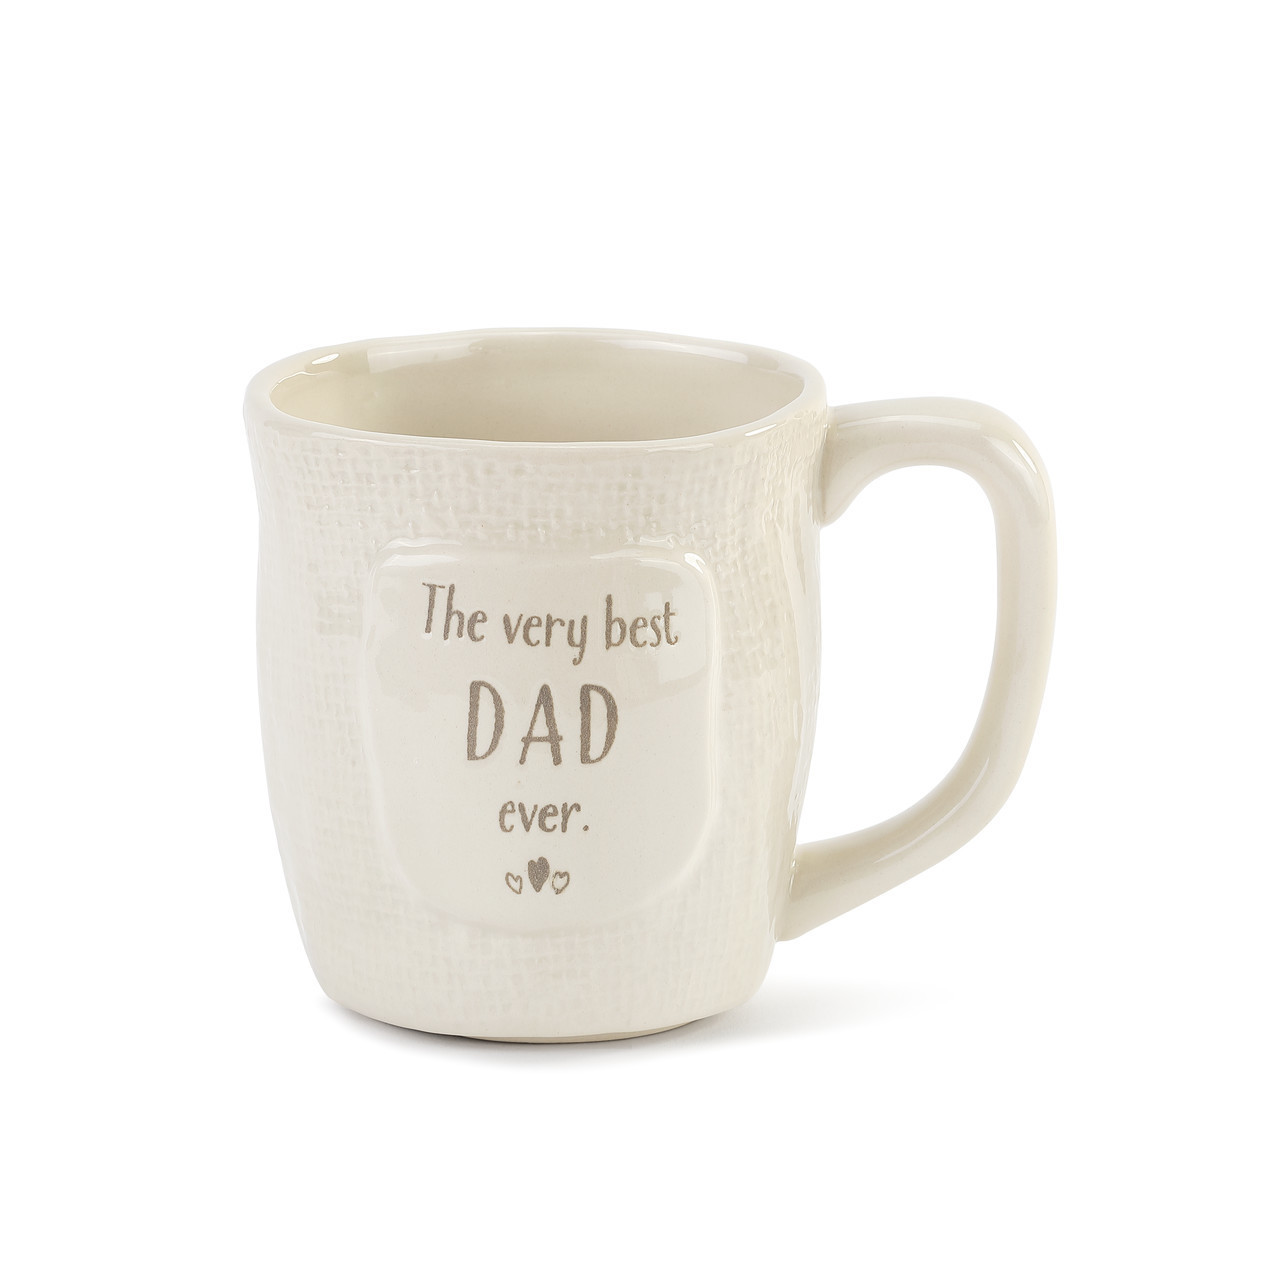 Inspire excitement and wonder with the perfectly playful Welcome to the World, The Very Best Mug. This unique ceramic mug features a classic textured cream appearance that is perfect for any new or existing dad, grandma. grandpa or aunt.